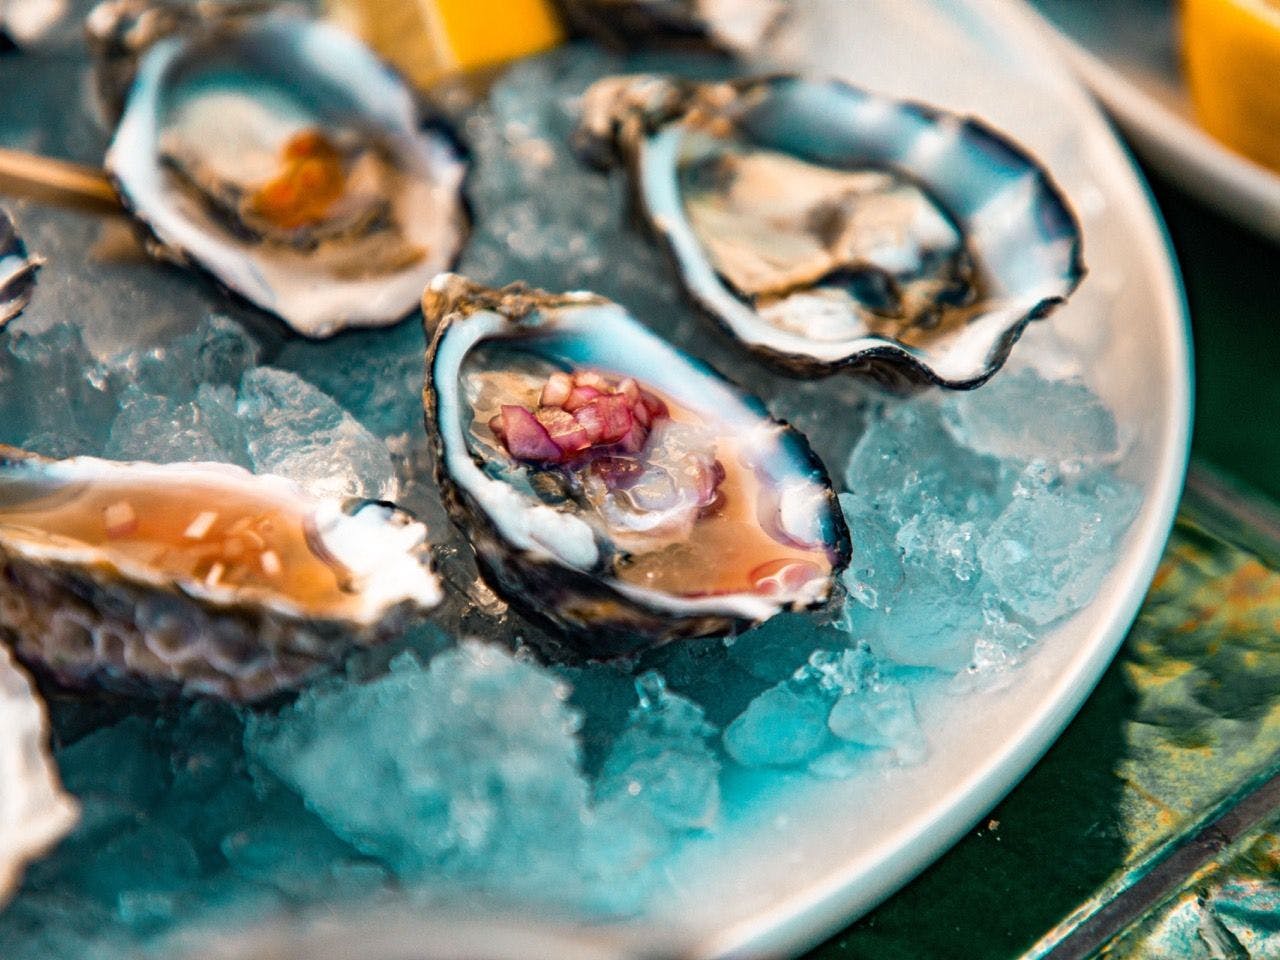 Oysters on a plate with ice